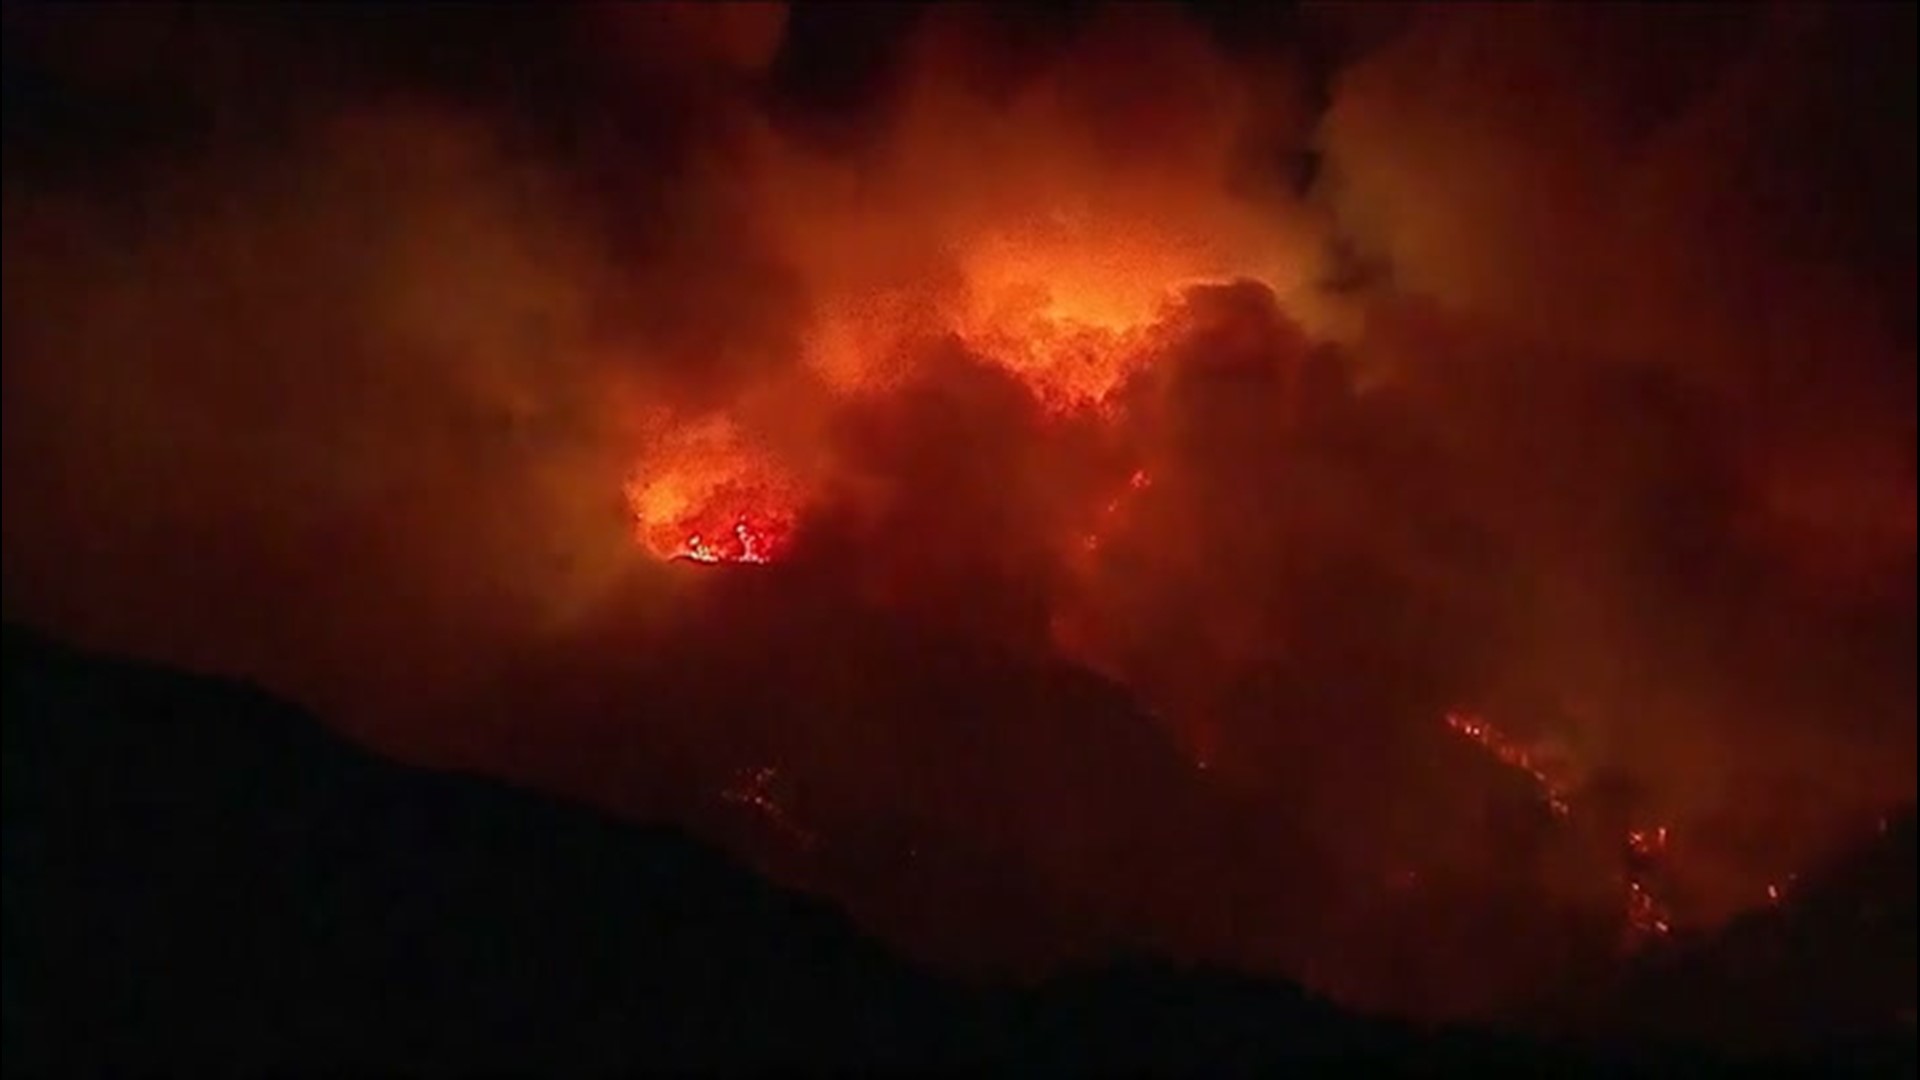 Aerial footage captured over the Bobcat Fire, shows the massive wildfire raging out of control in Los Angeles County, California, on Sept. 20. Firefighters have been battling the blaze for more than two weeks.